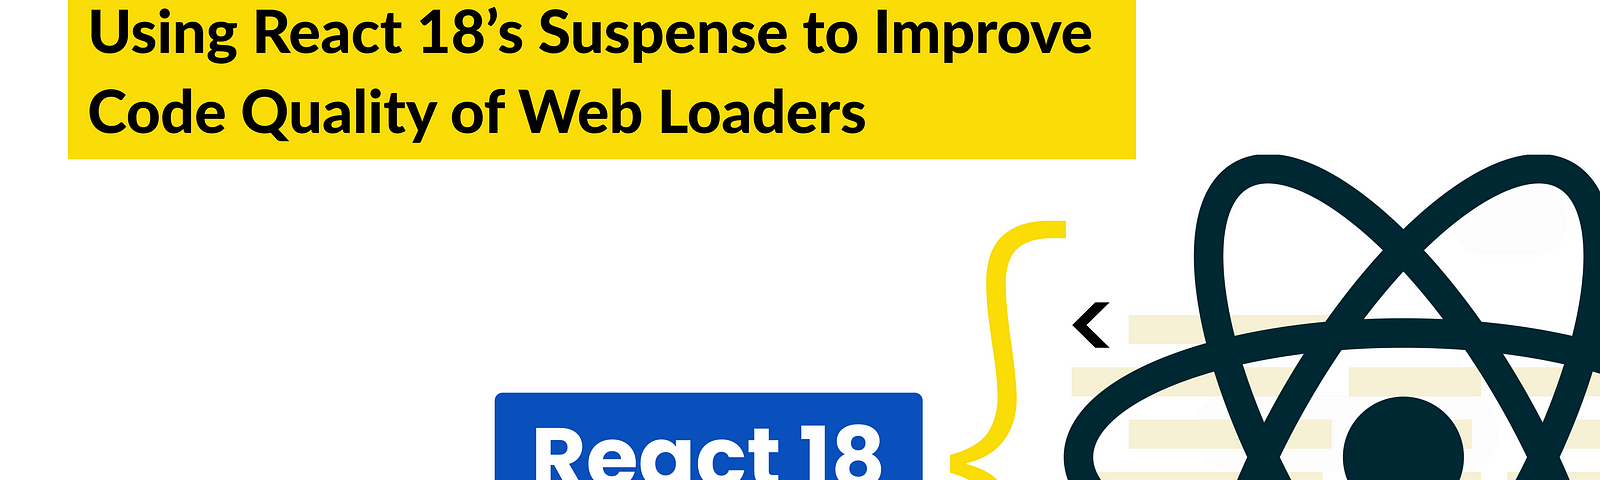 Using React 18’s Suspense to Improve Code Quality of Web Loaders